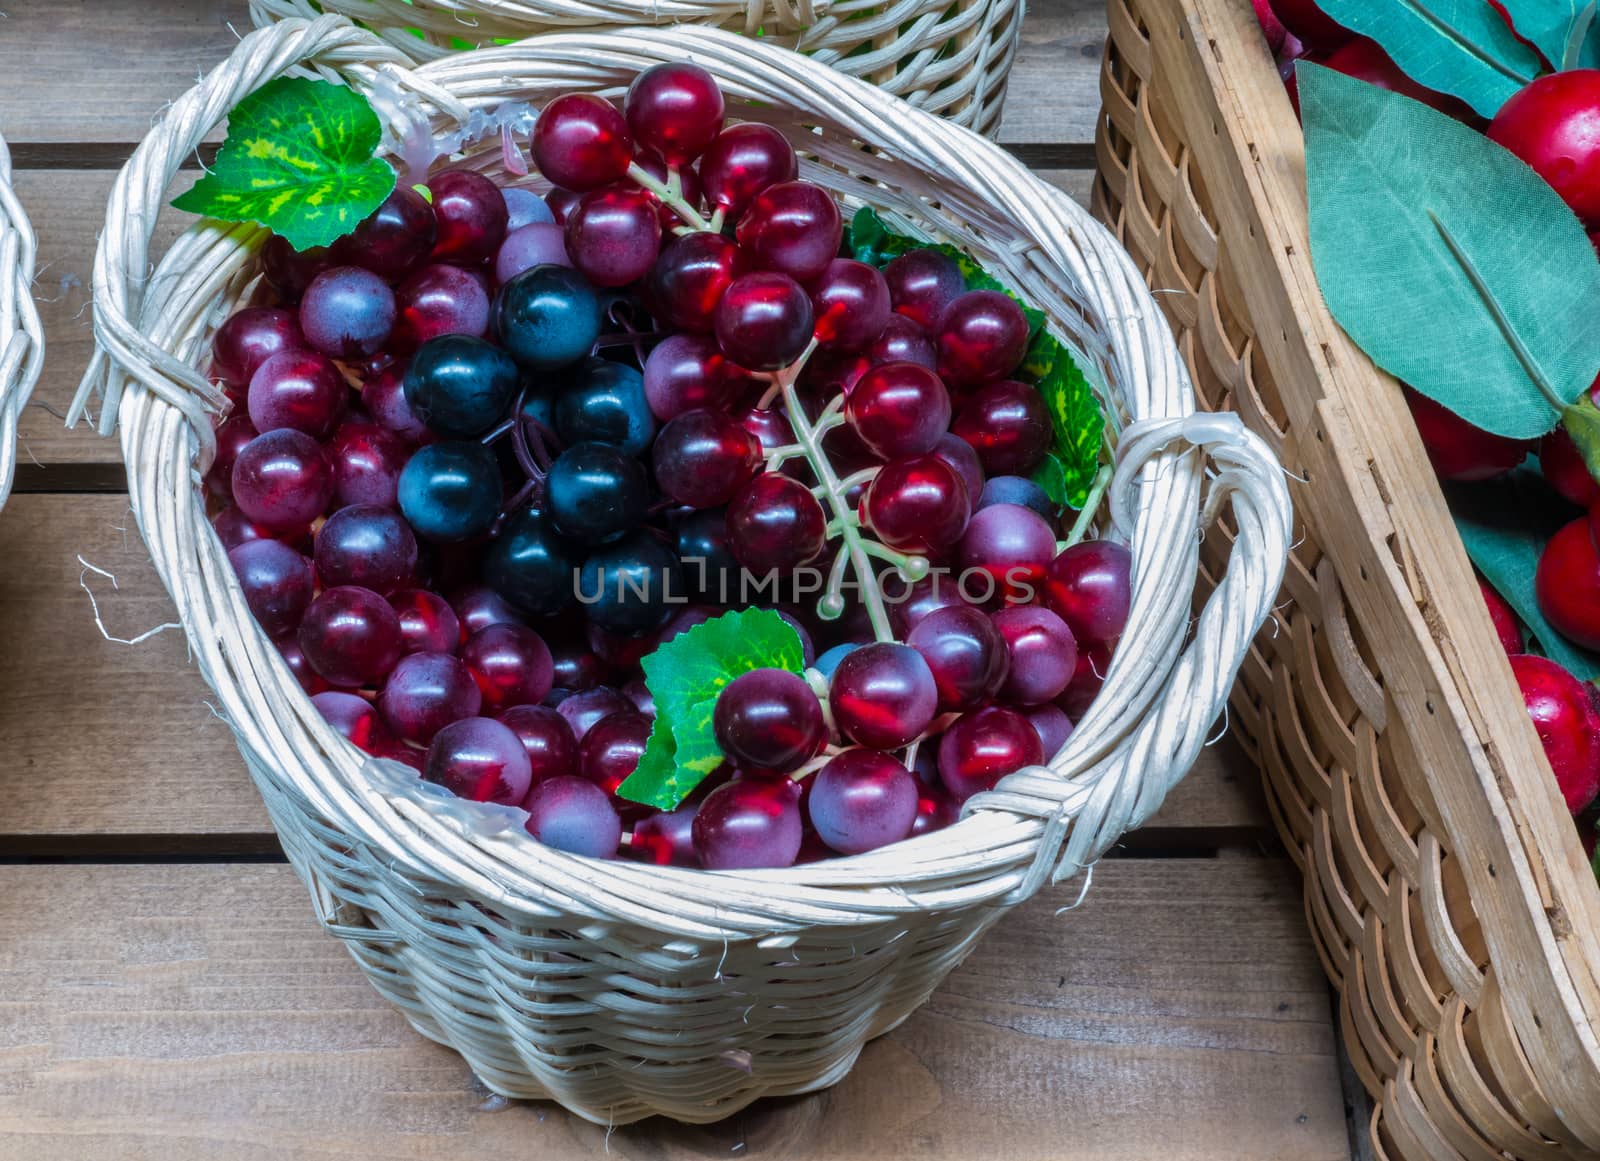 The grapes  in a wicker basket by golengstock